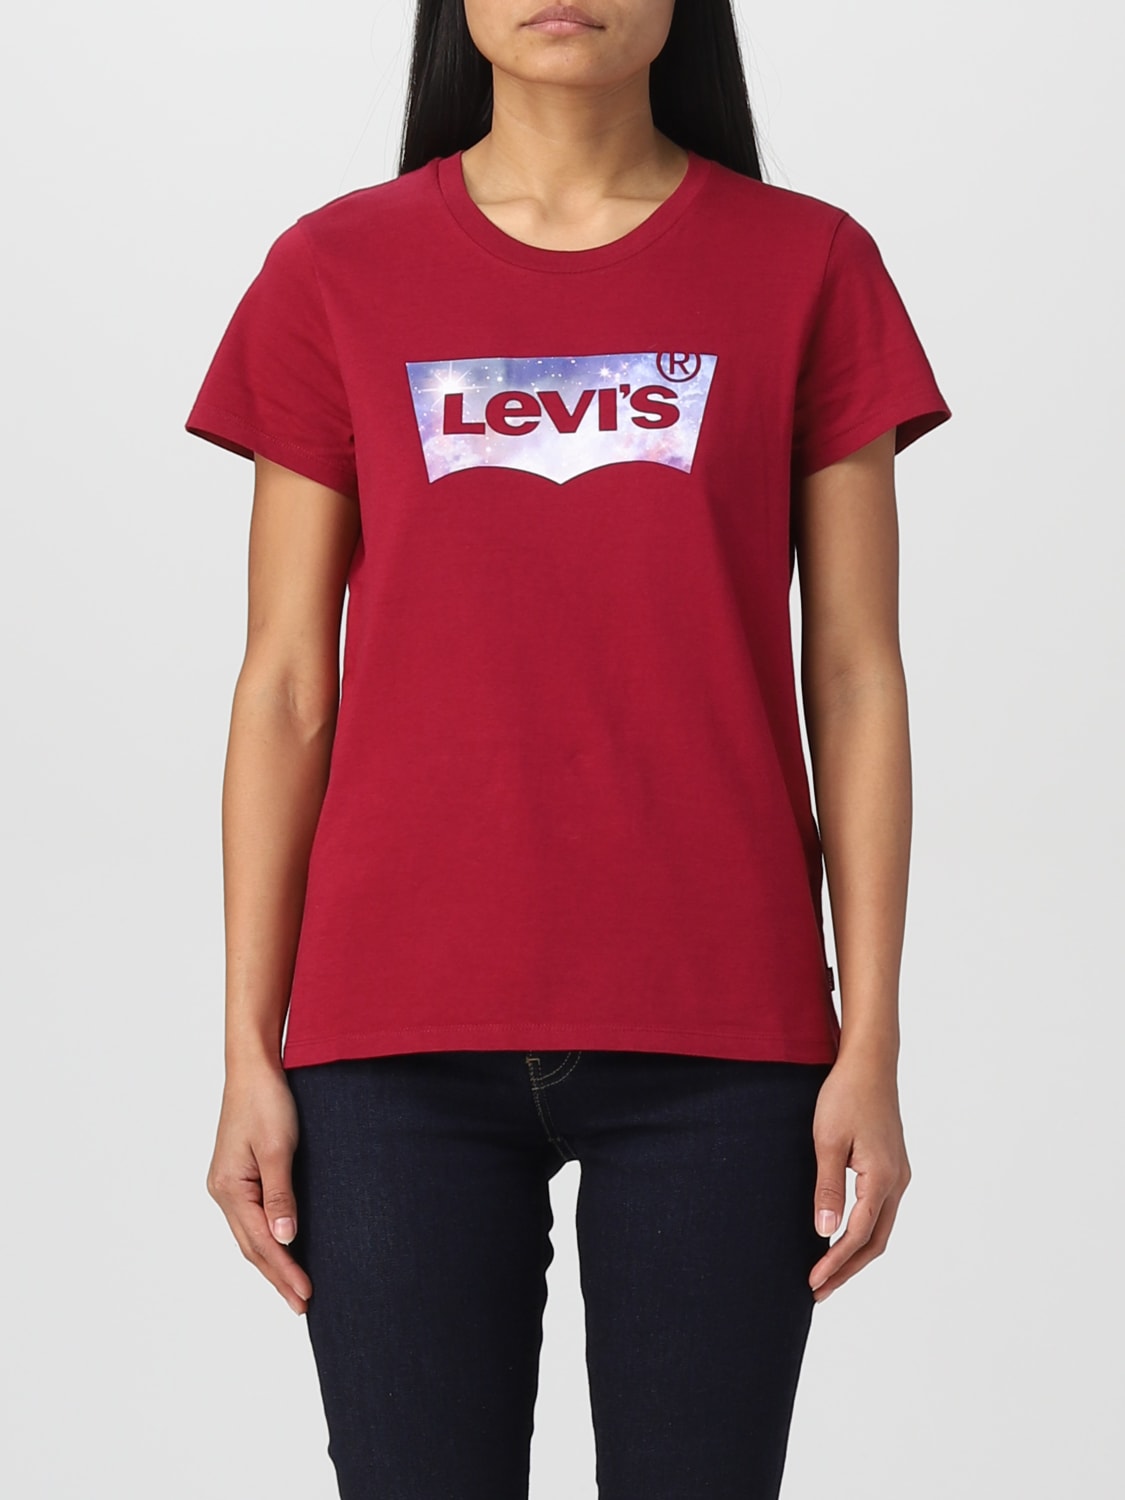 Levi'S: T-Shirt For Woman - Red | Levi'S T-Shirt 173692024 Online On  Giglio.Com